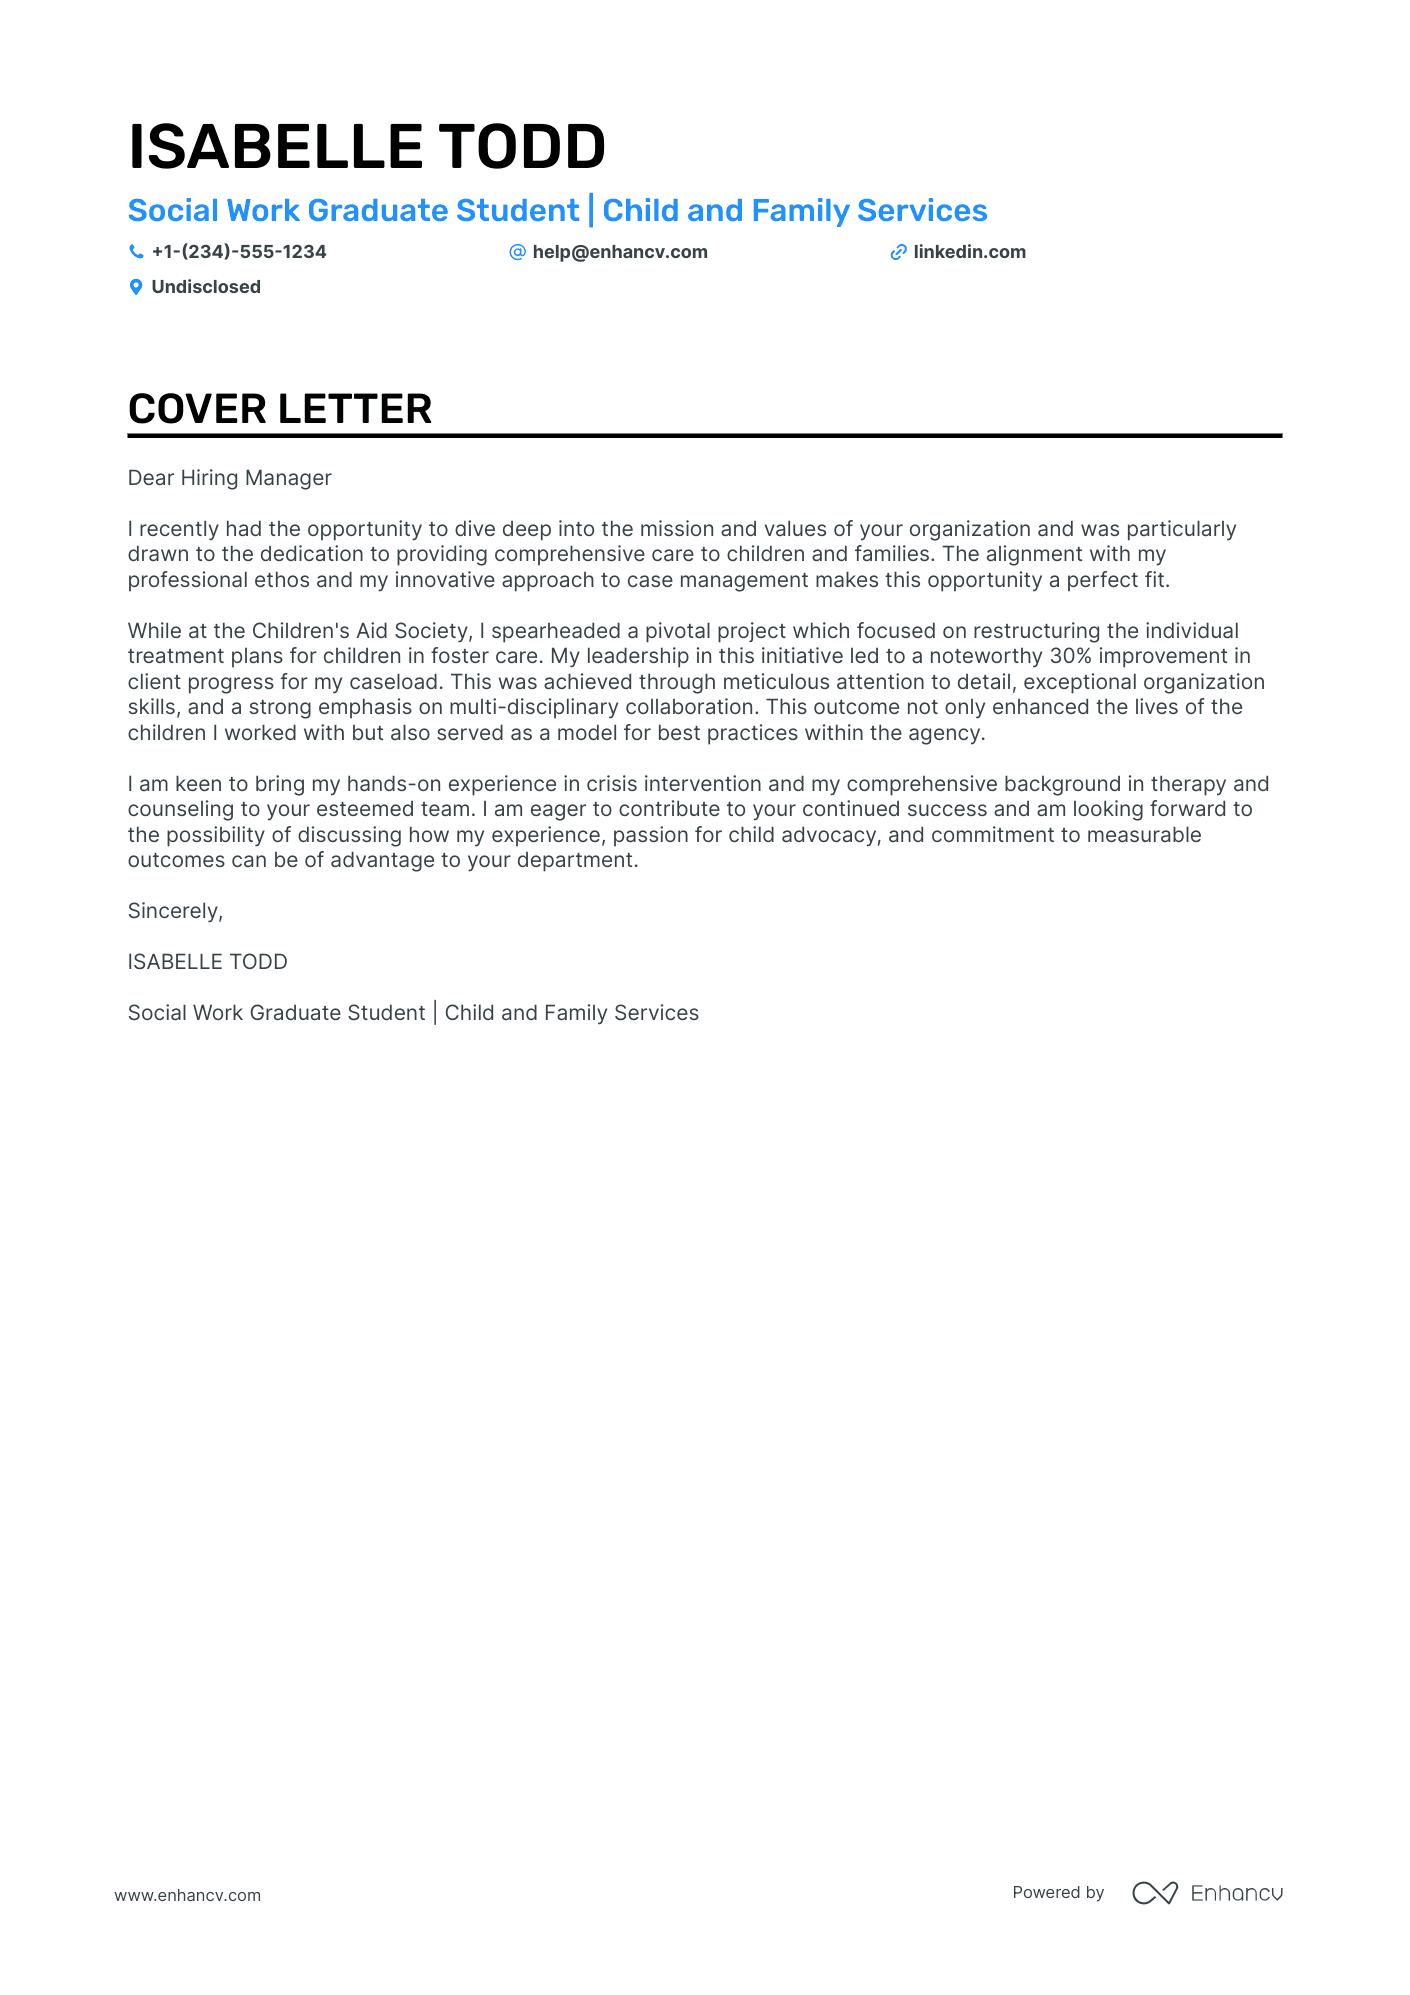 example of social work cover letter